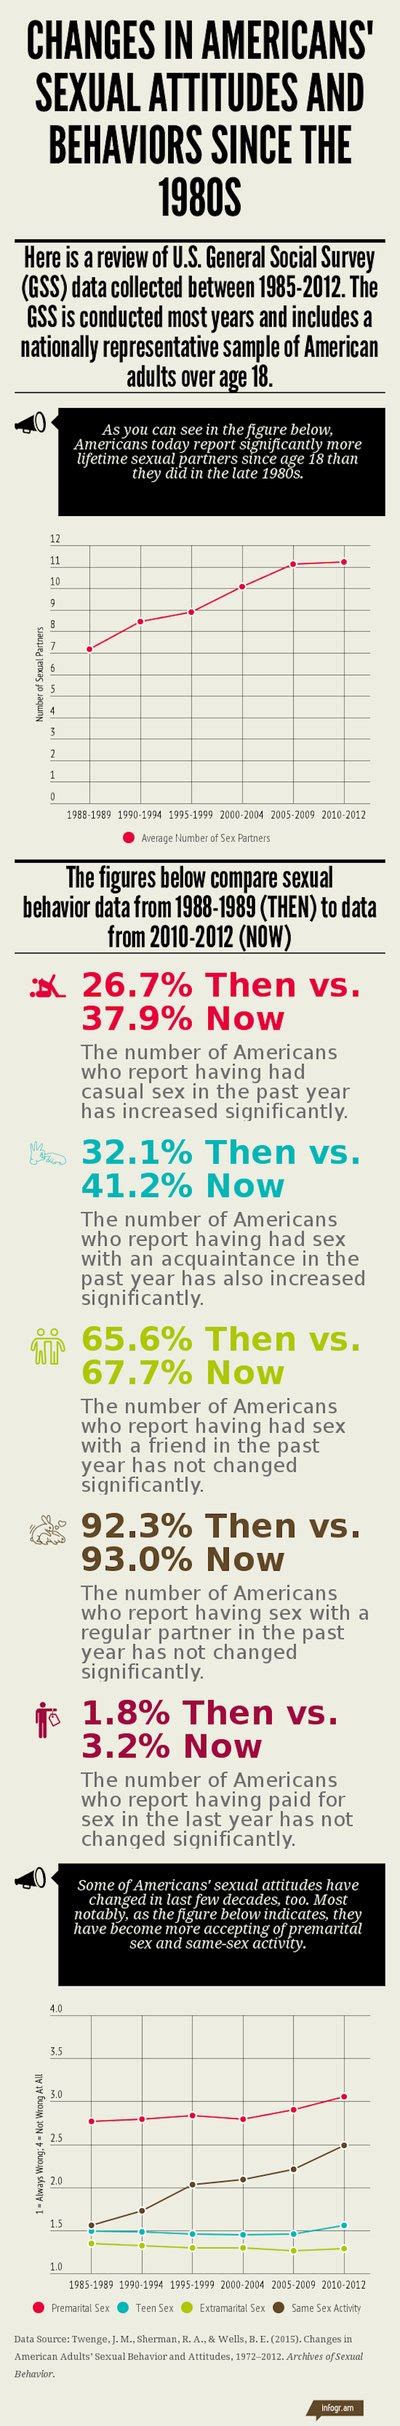 4 Reasons Why Americans Are Having More Sex Than In The 80s